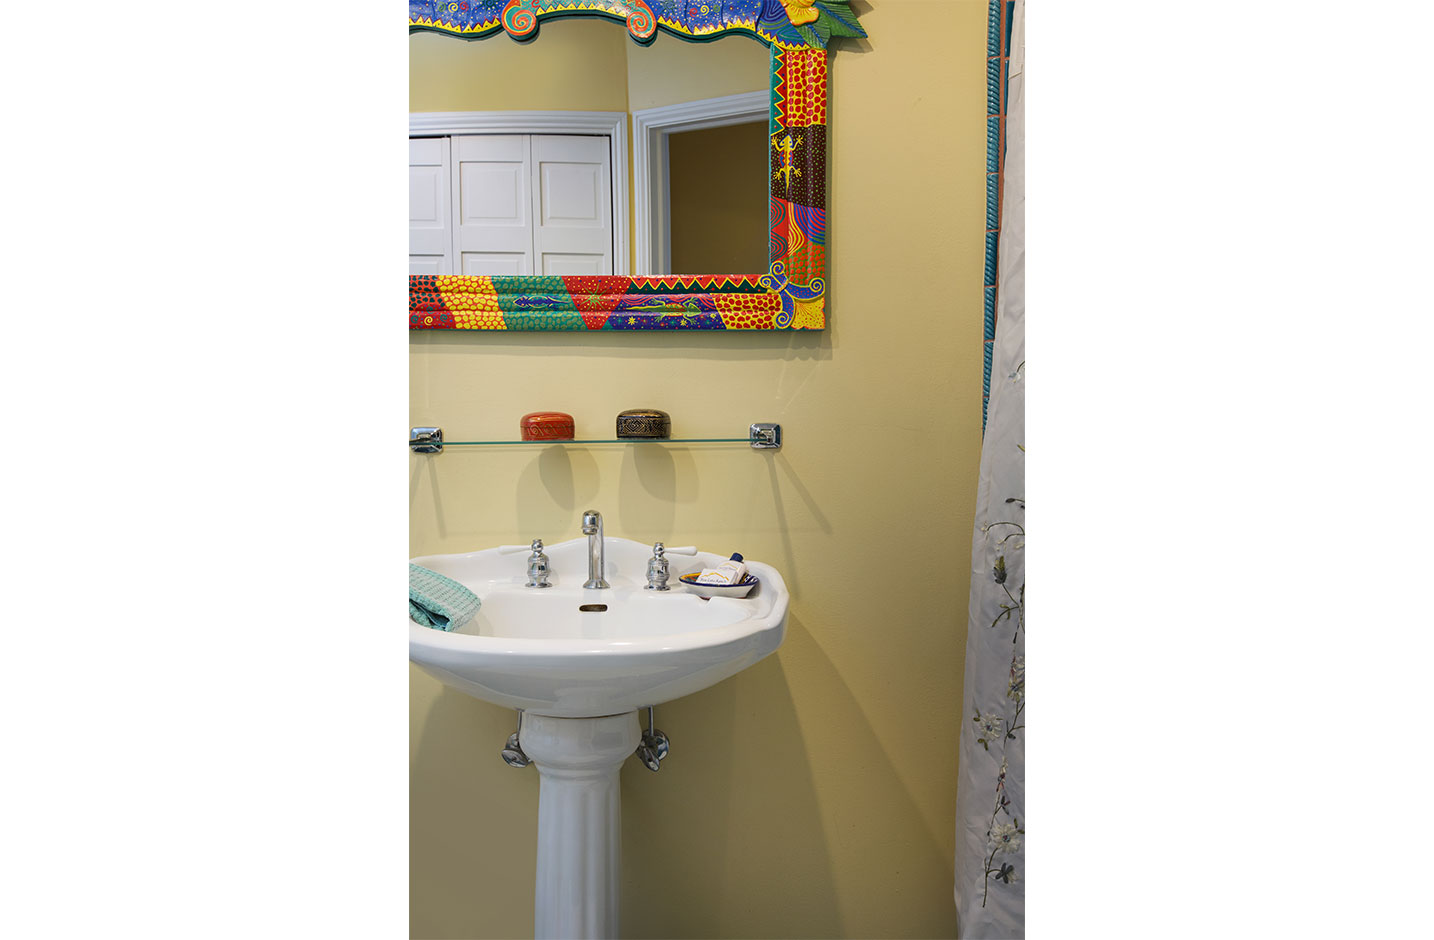 Bathroom sink with a colorful framed mirror